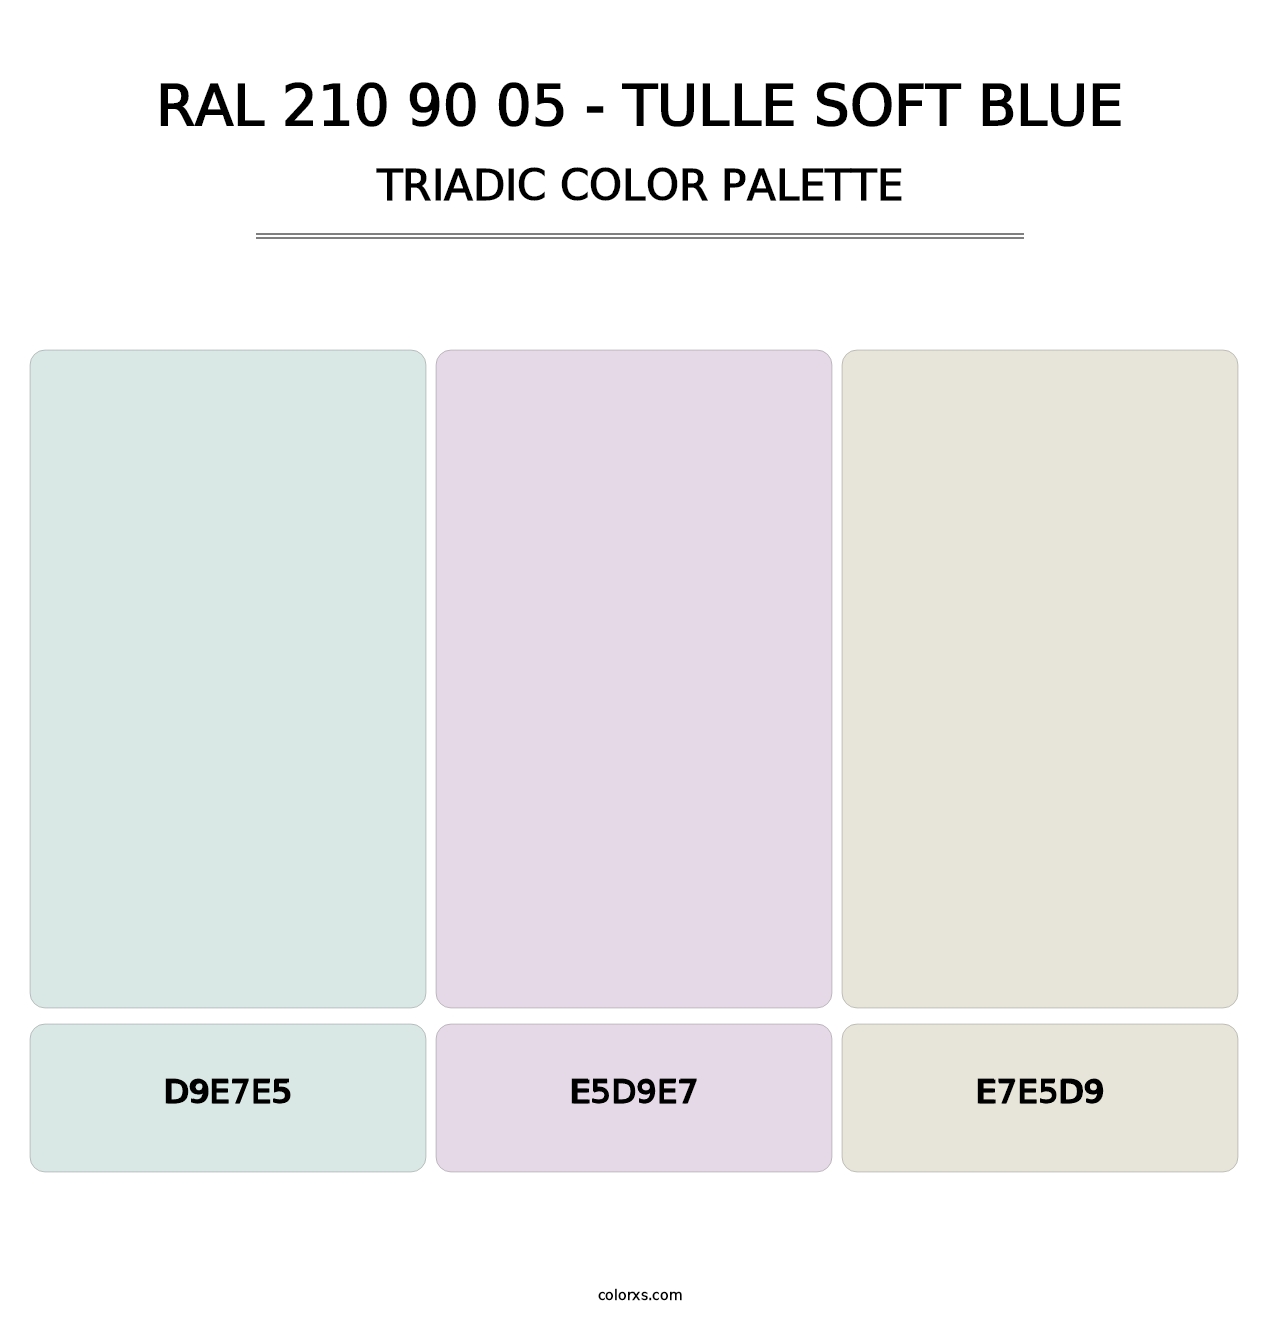 RAL 210 90 05 - Tulle Soft Blue - Triadic Color Palette